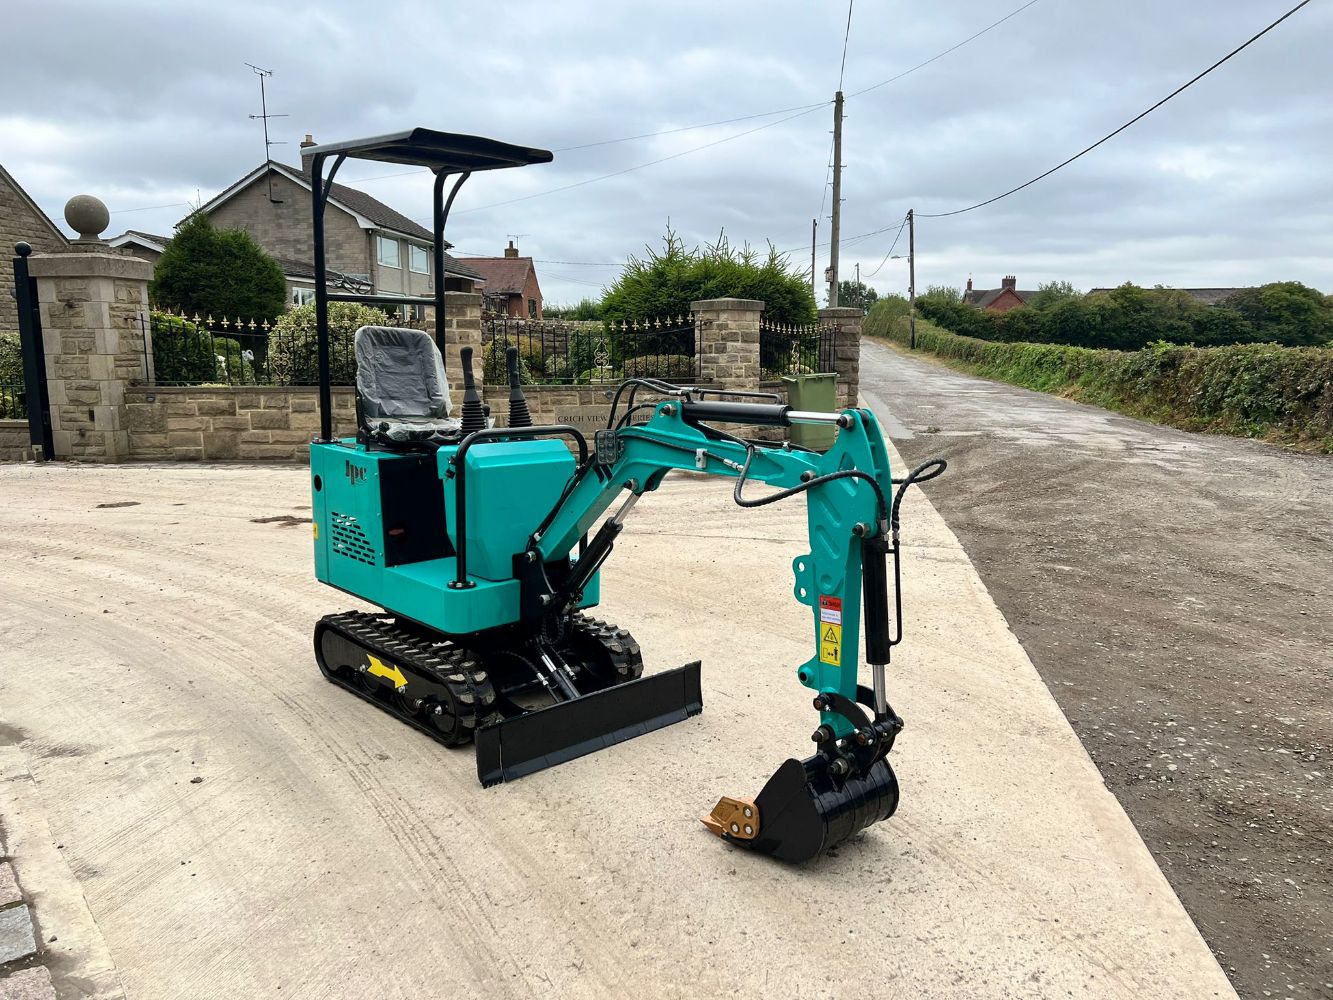 ENDS WEDNESDAY 10AM! CLUB CAR ELECTRIC BUGGY, JOHN DEERE 4WD MOWER, PLANT TRAILER, BRAND NEW CHIPPER, JEEP CHEROKEE, 2.5T HIGH LIFT FORKLIFT!